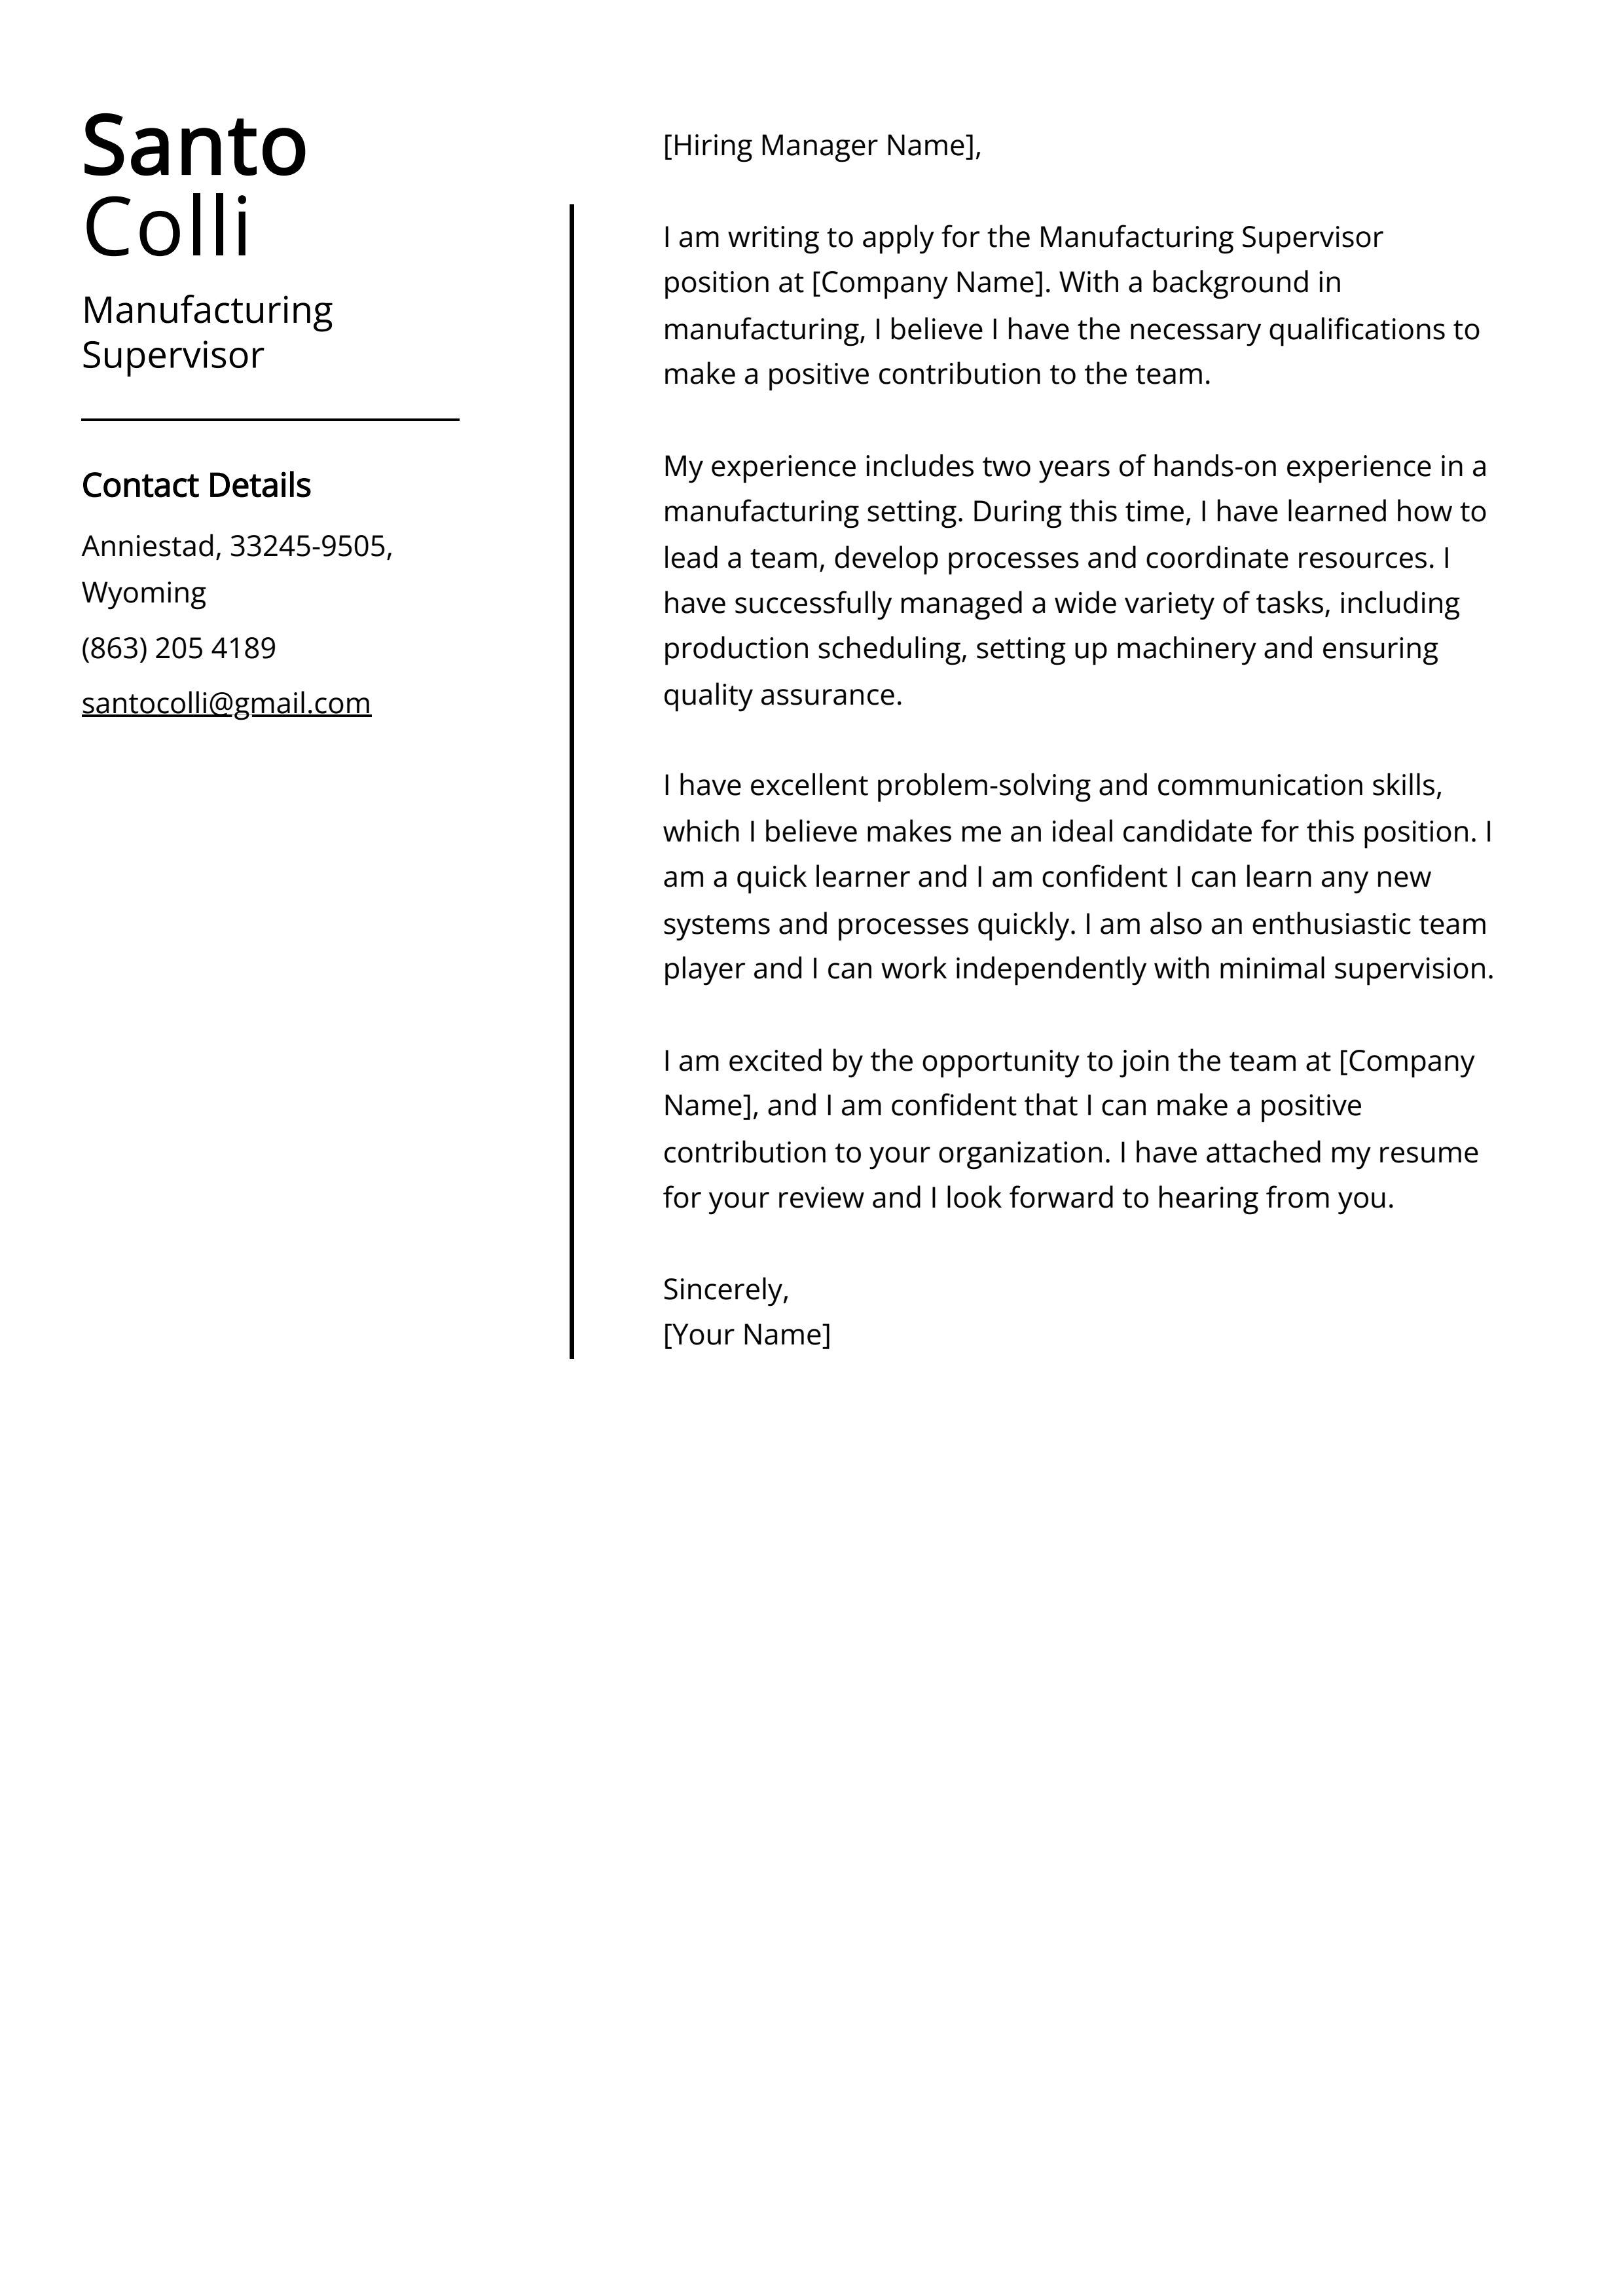 Manufacturing Supervisor Cover Letter Example